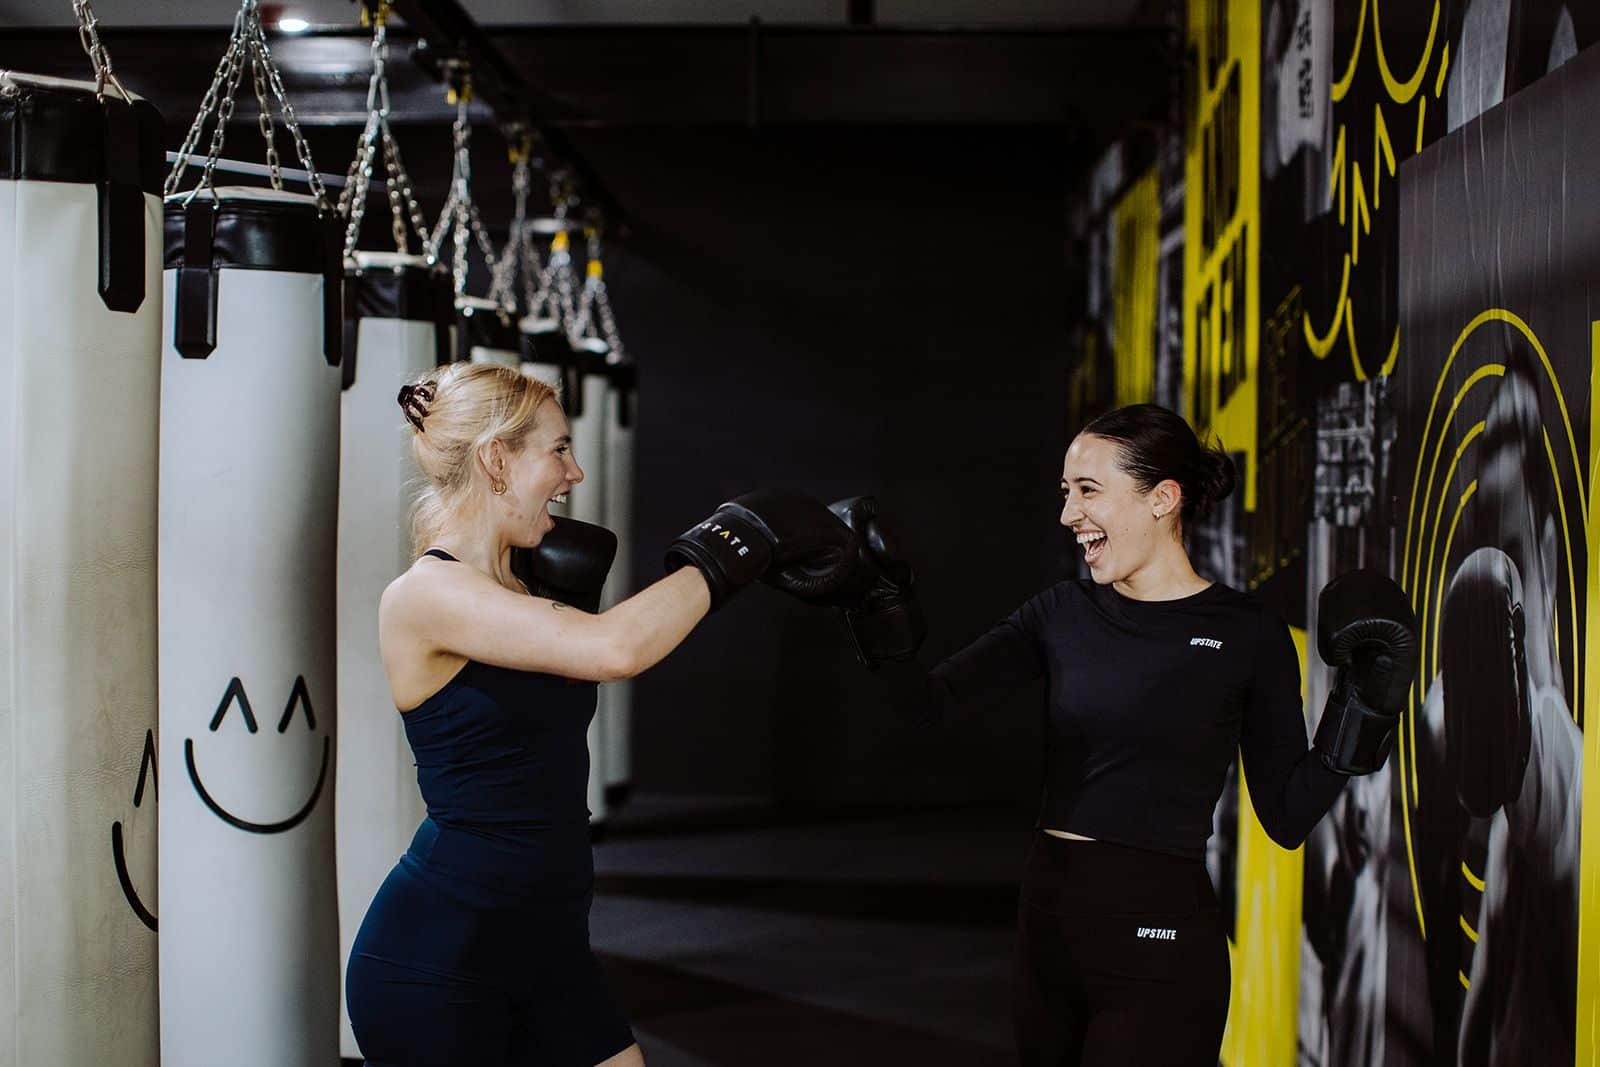 Two women box playfully wearing gloves in the dark boxing room at Upstate Fitzroy. Vibrant coloured LEDs light up the gritty chic space.